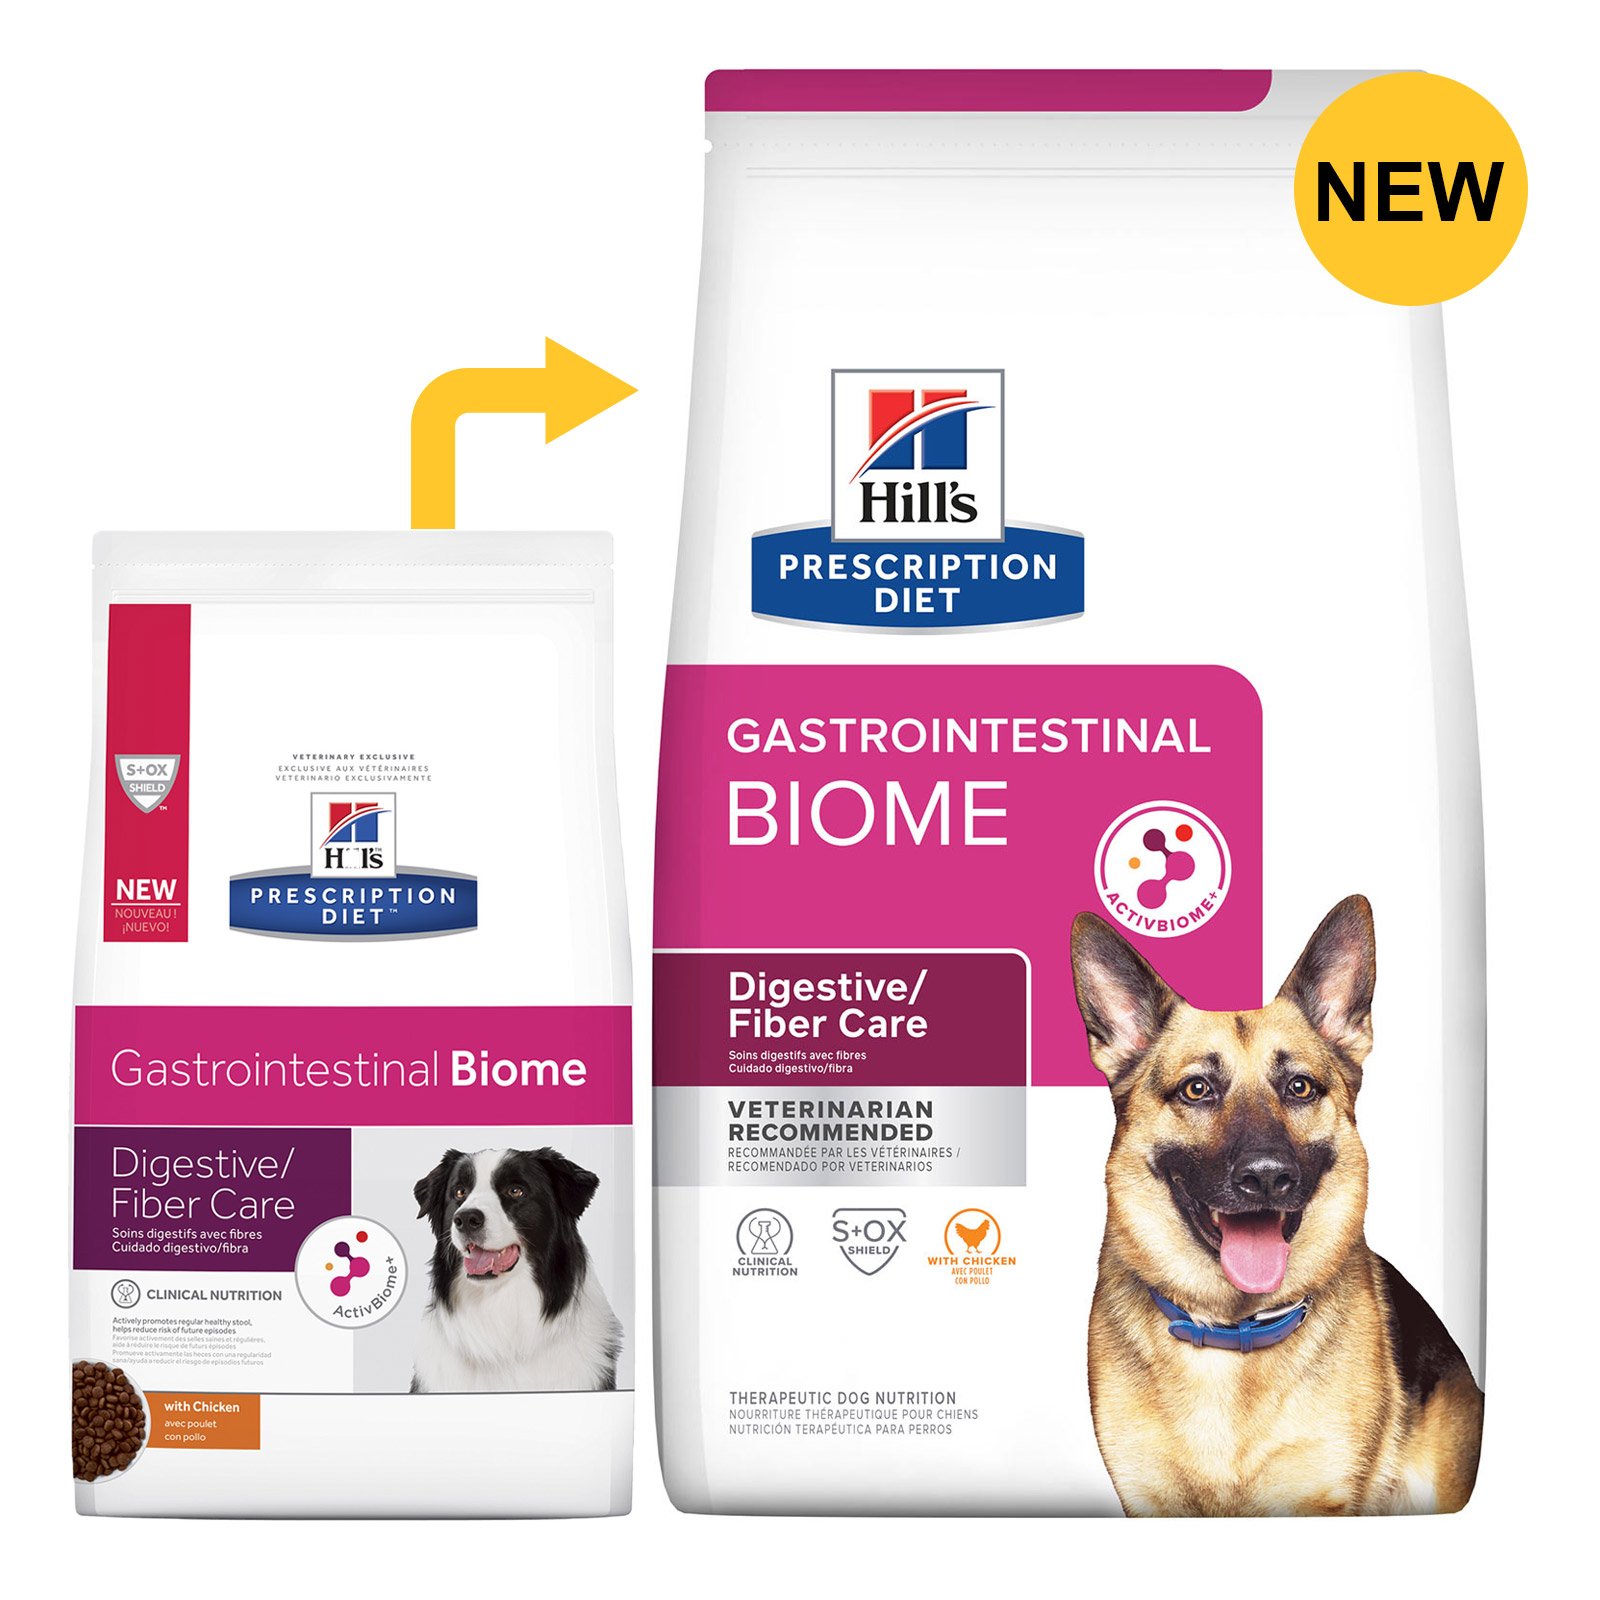 Hill's Prescription Diet Gastrointestinal Biome Digestive Fibre Care with Chicken Dry Dog Food 